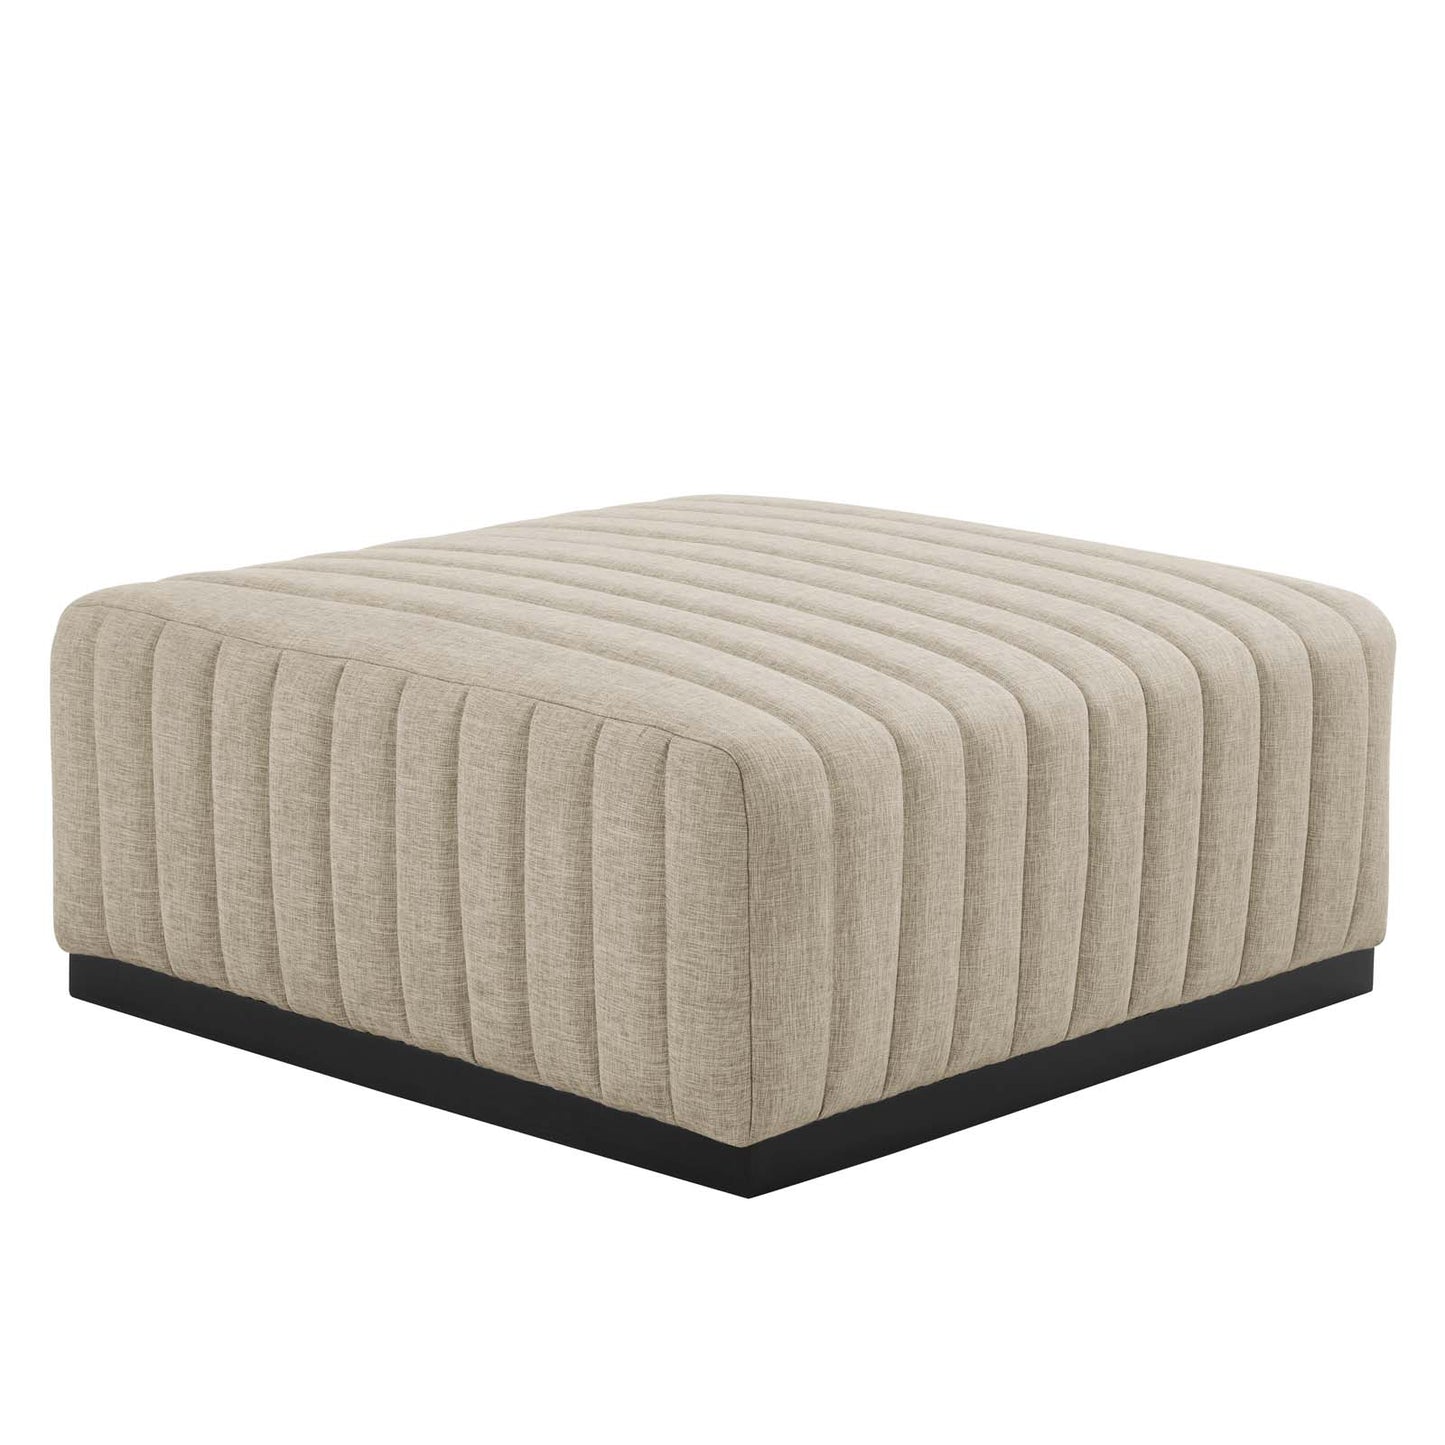 Conjure Channel Tufted Upholstered Fabric Ottoman Black Beige EEI-5501-BLK-BEI